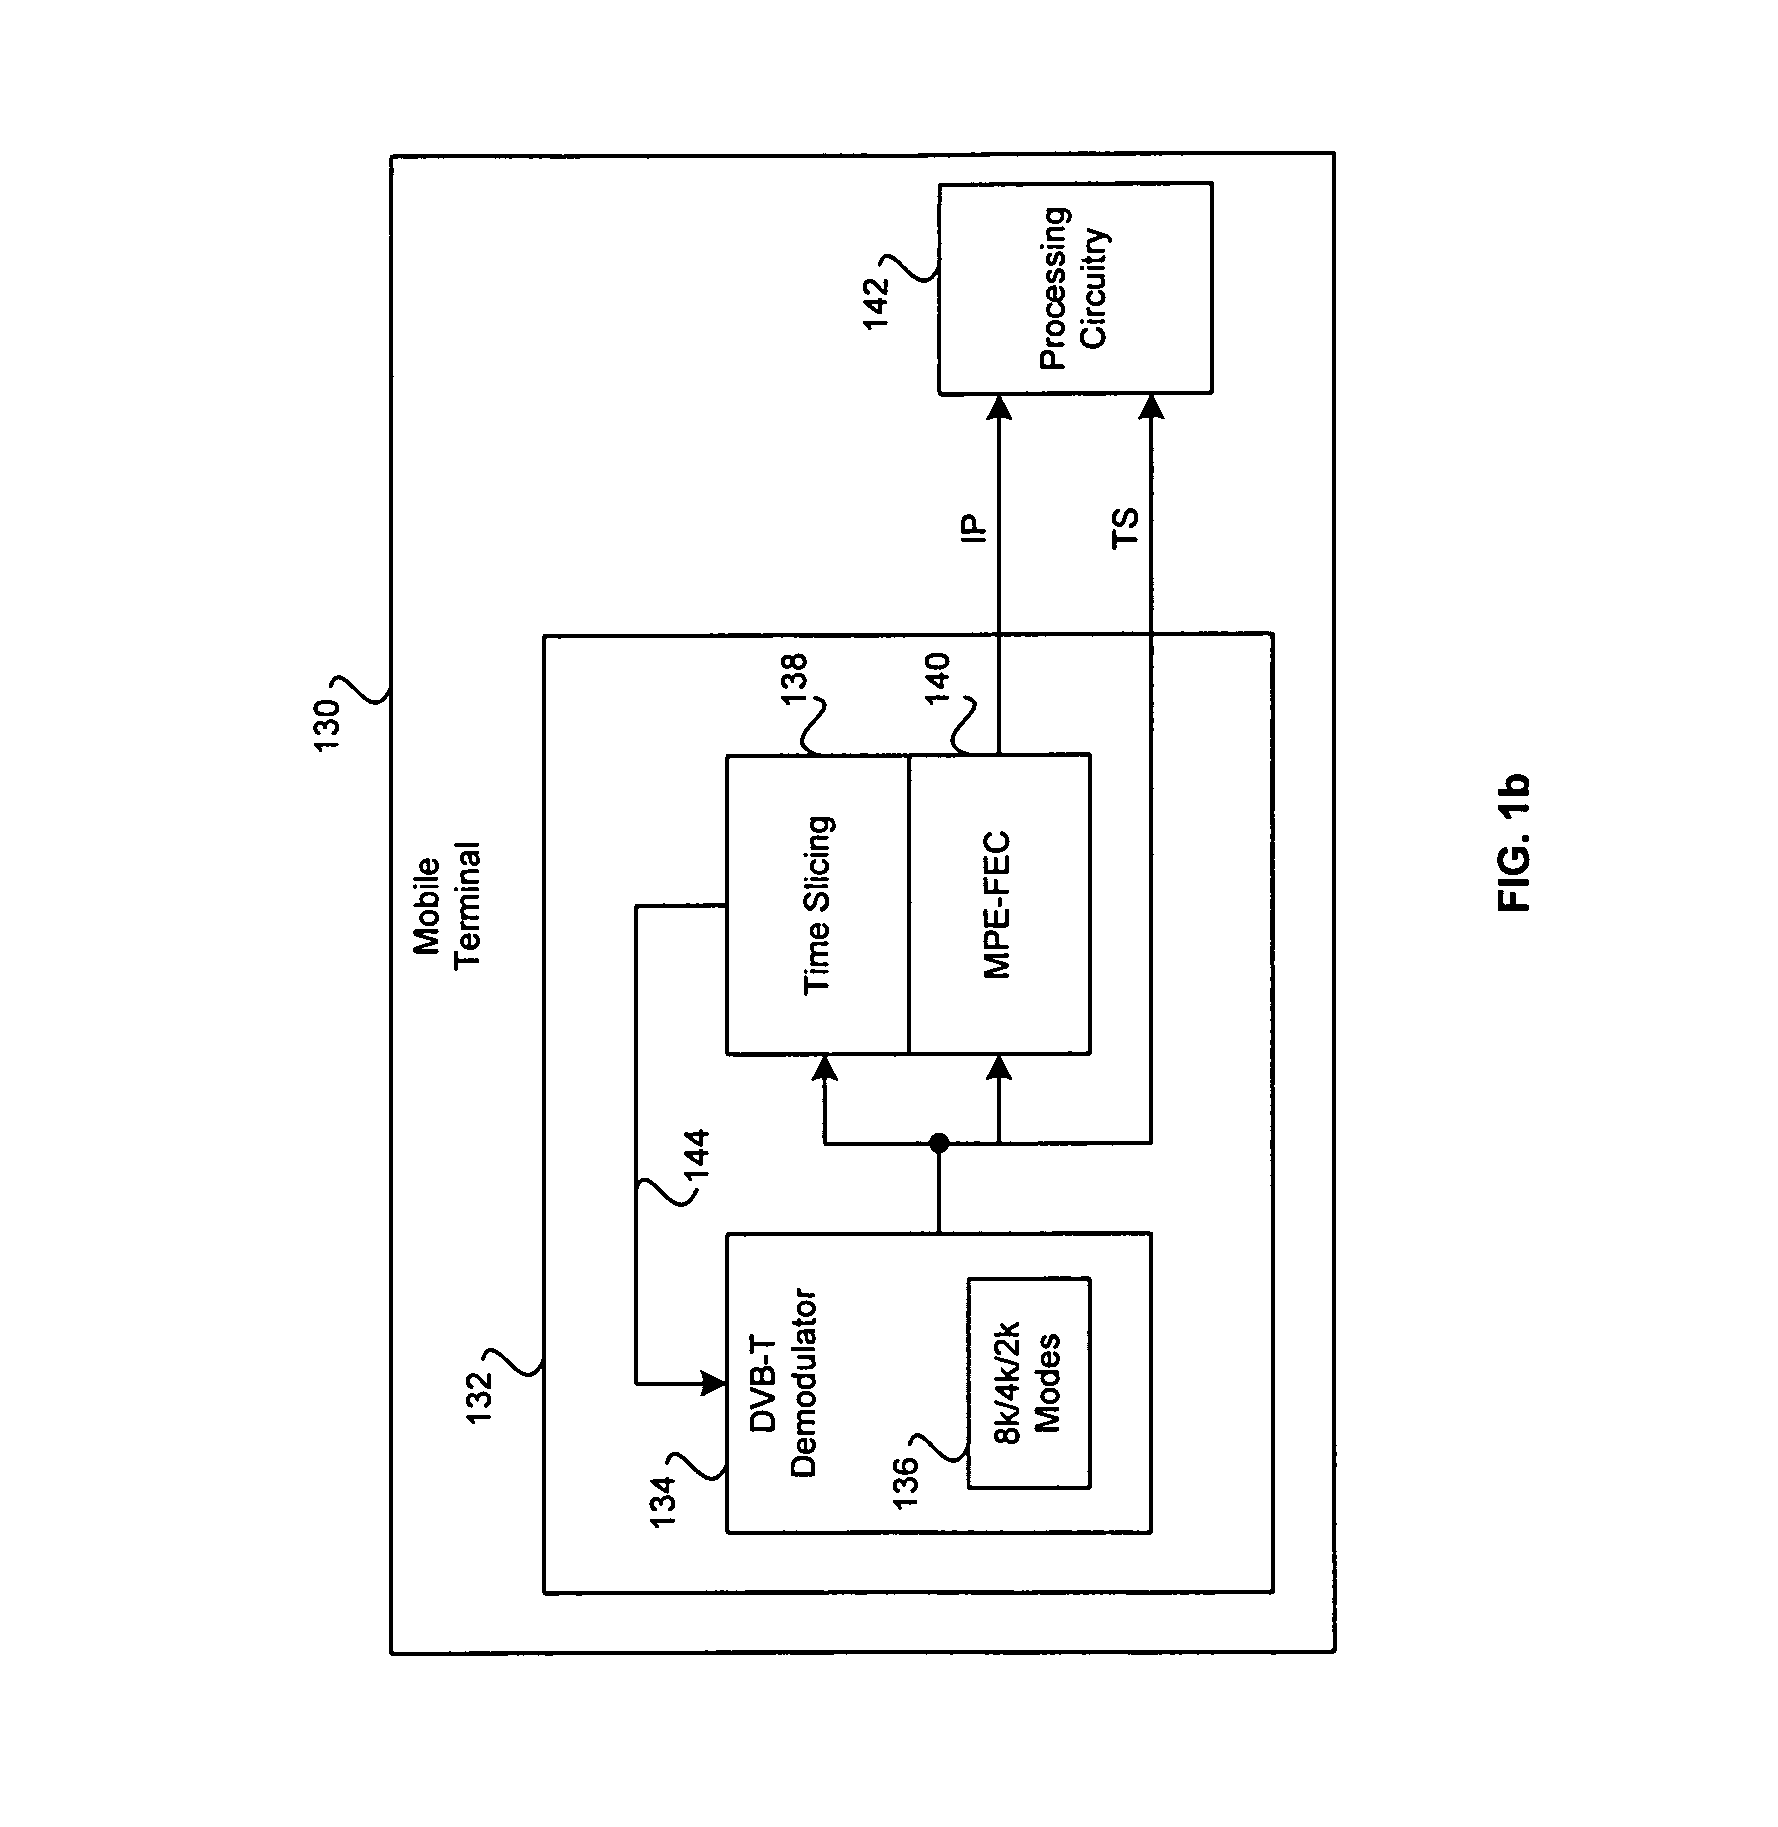 Method and system for a mobile receiver architecture for European band cellular and broadcasting